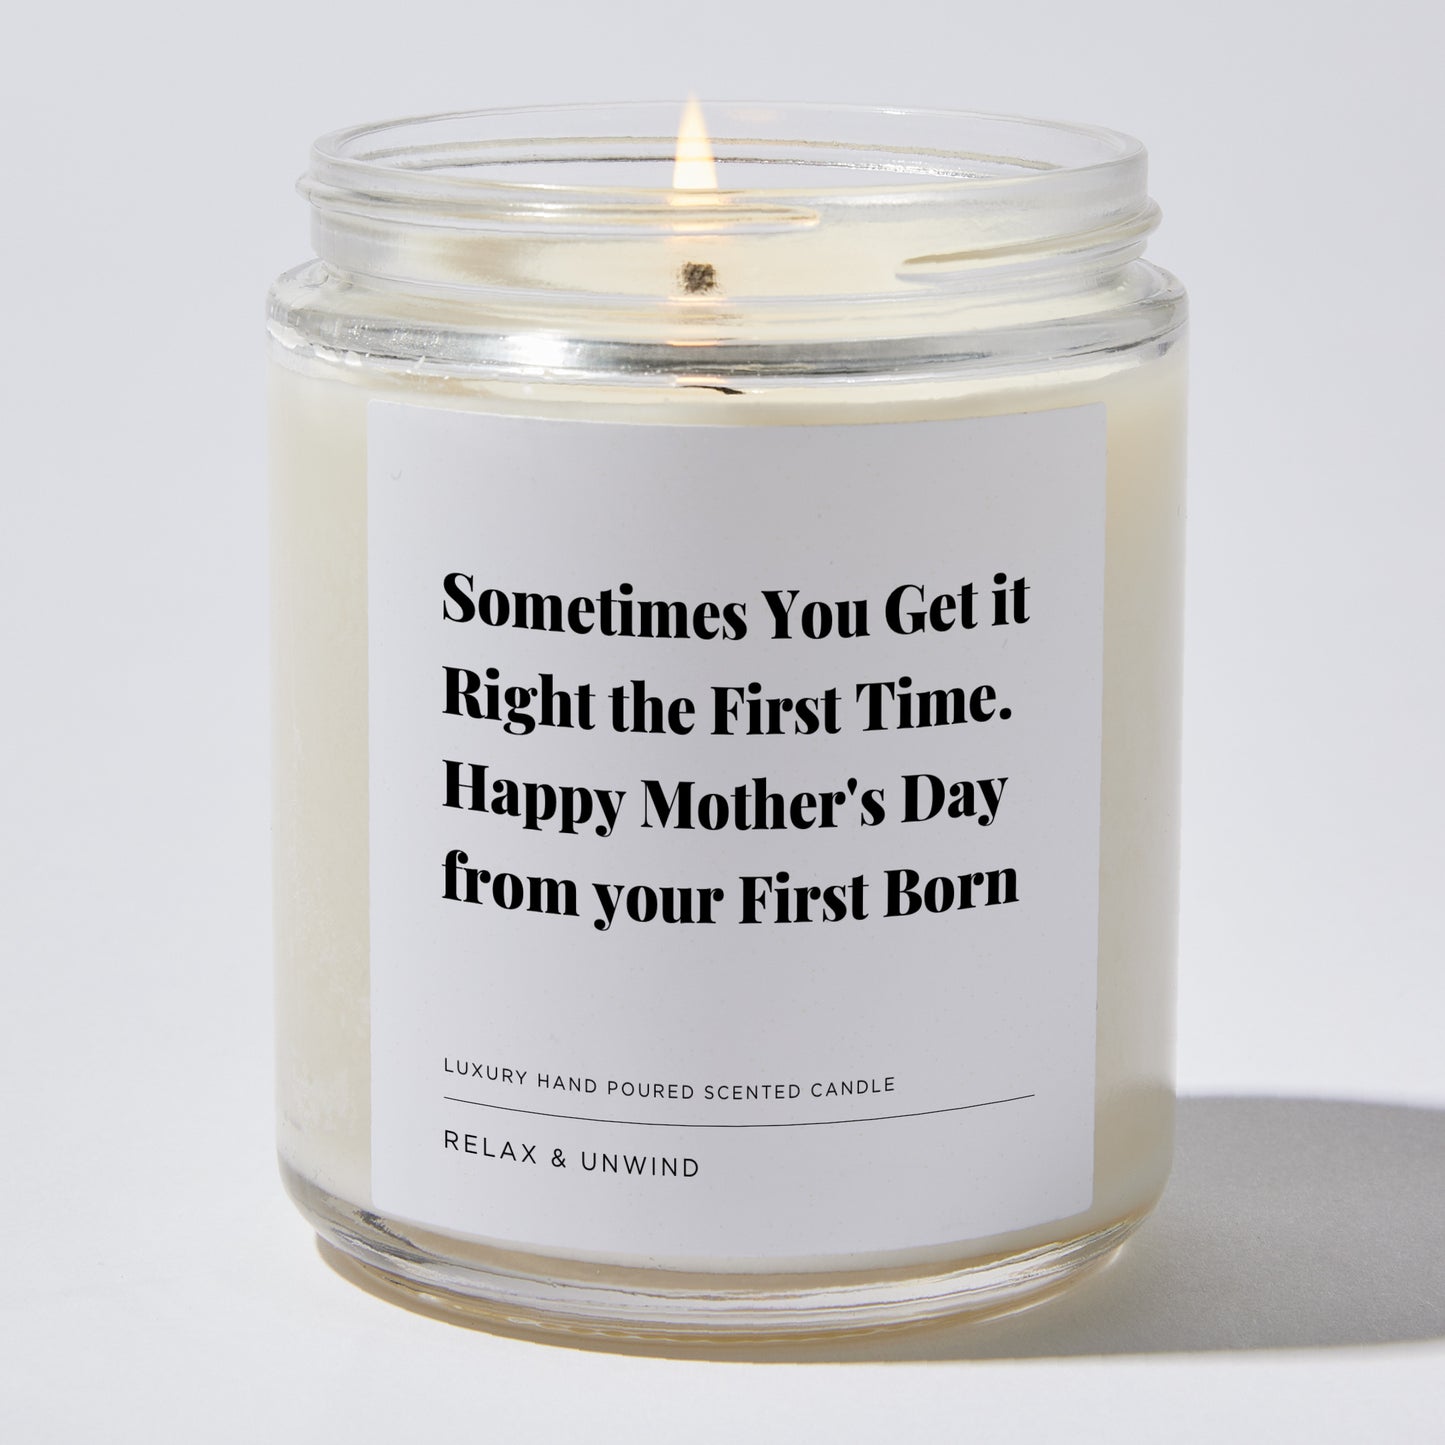 Gift for Mom - Sometimes You Get it Right the First Time. Happy Mother's Day from your First Born - Candle